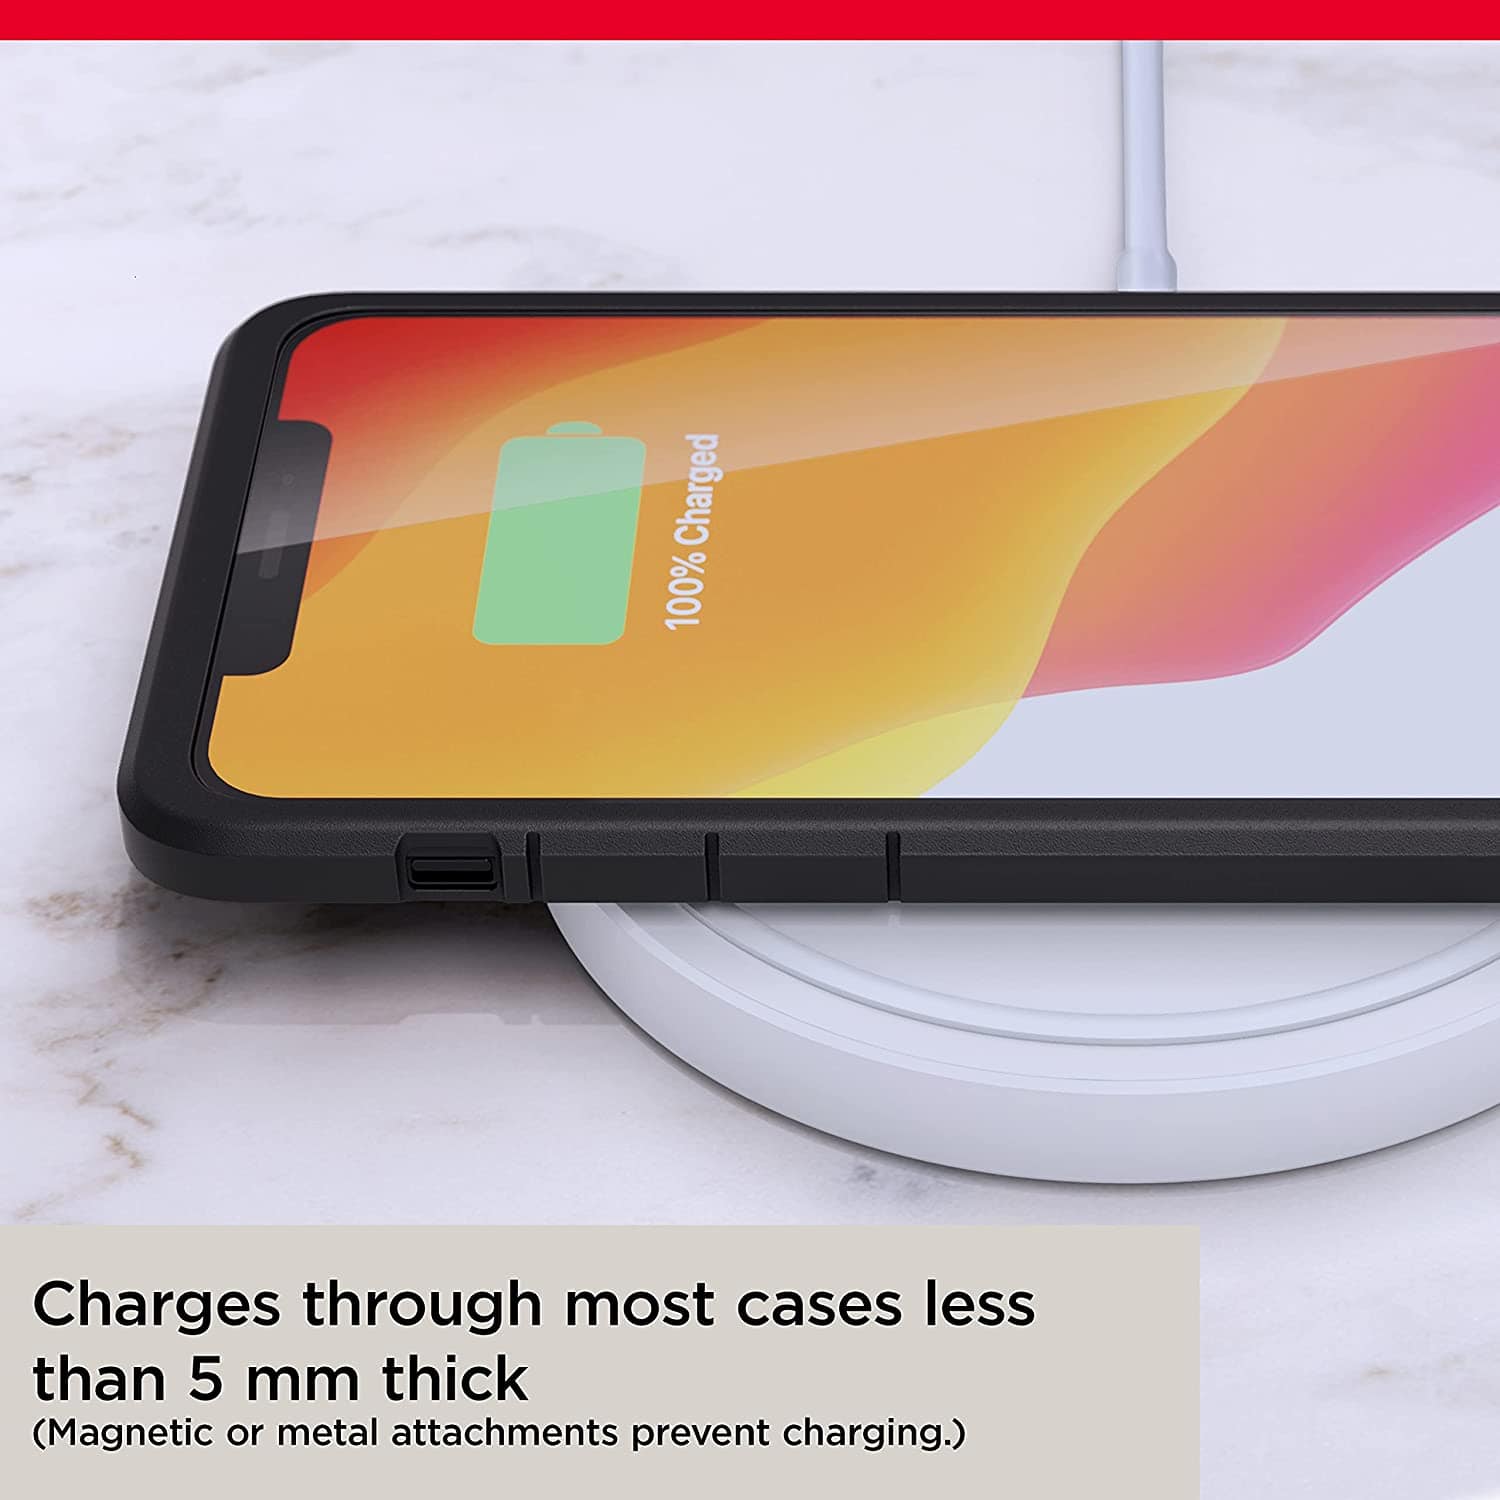 SanDisk iXpand Wireless 15W Fast Charger with QC 3.0 Adapter-Wireless Charger-dealsplant